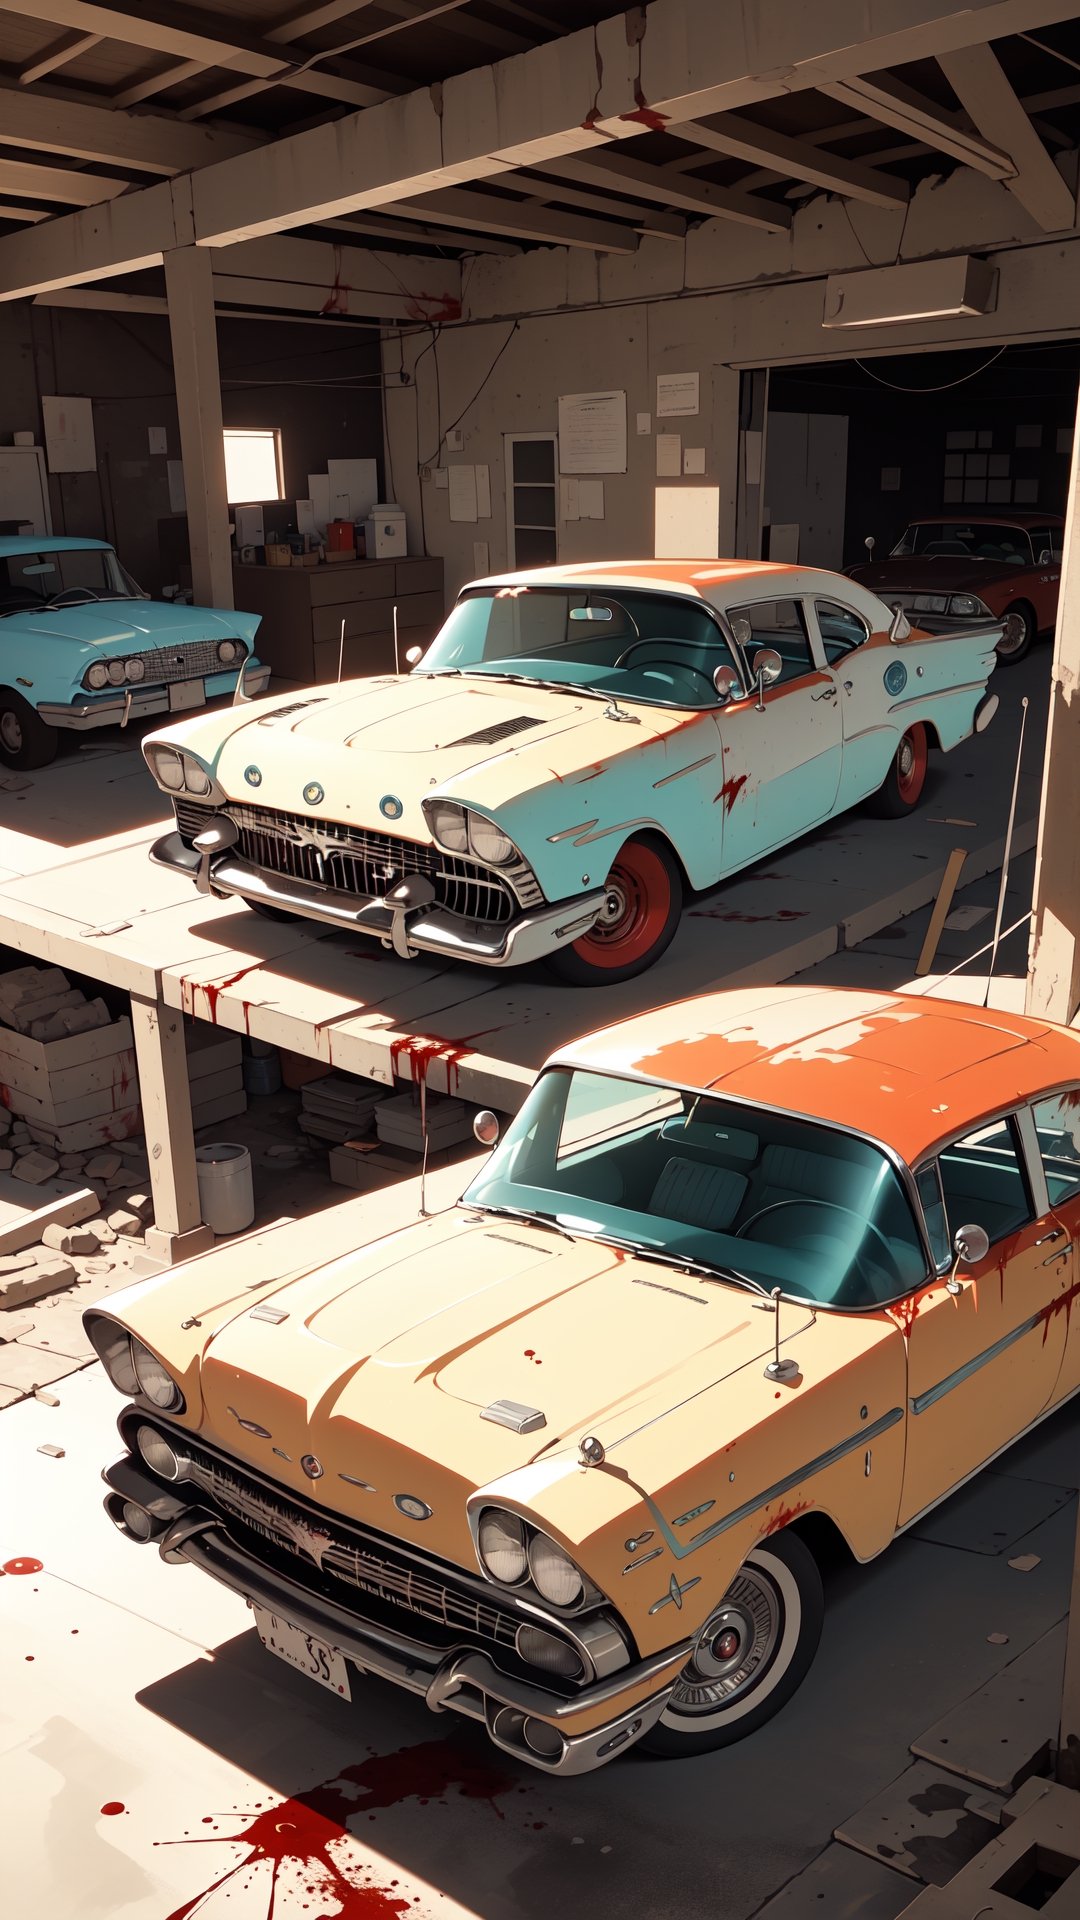 A photo realistic image of a complete rusted, four-door, (((blood red))), (((1958 Plymouth Fury))) in an old garage full of tools, night, focus on the intricate details of its faded paint job, the wear and tear on the tires, and the aged textures of the metal body. Use the multi-prompt "car::photorealistic::rust" with a prompt weighting of "rust" to emphasize the aged textures and worn out look of the car, car,photo r3al